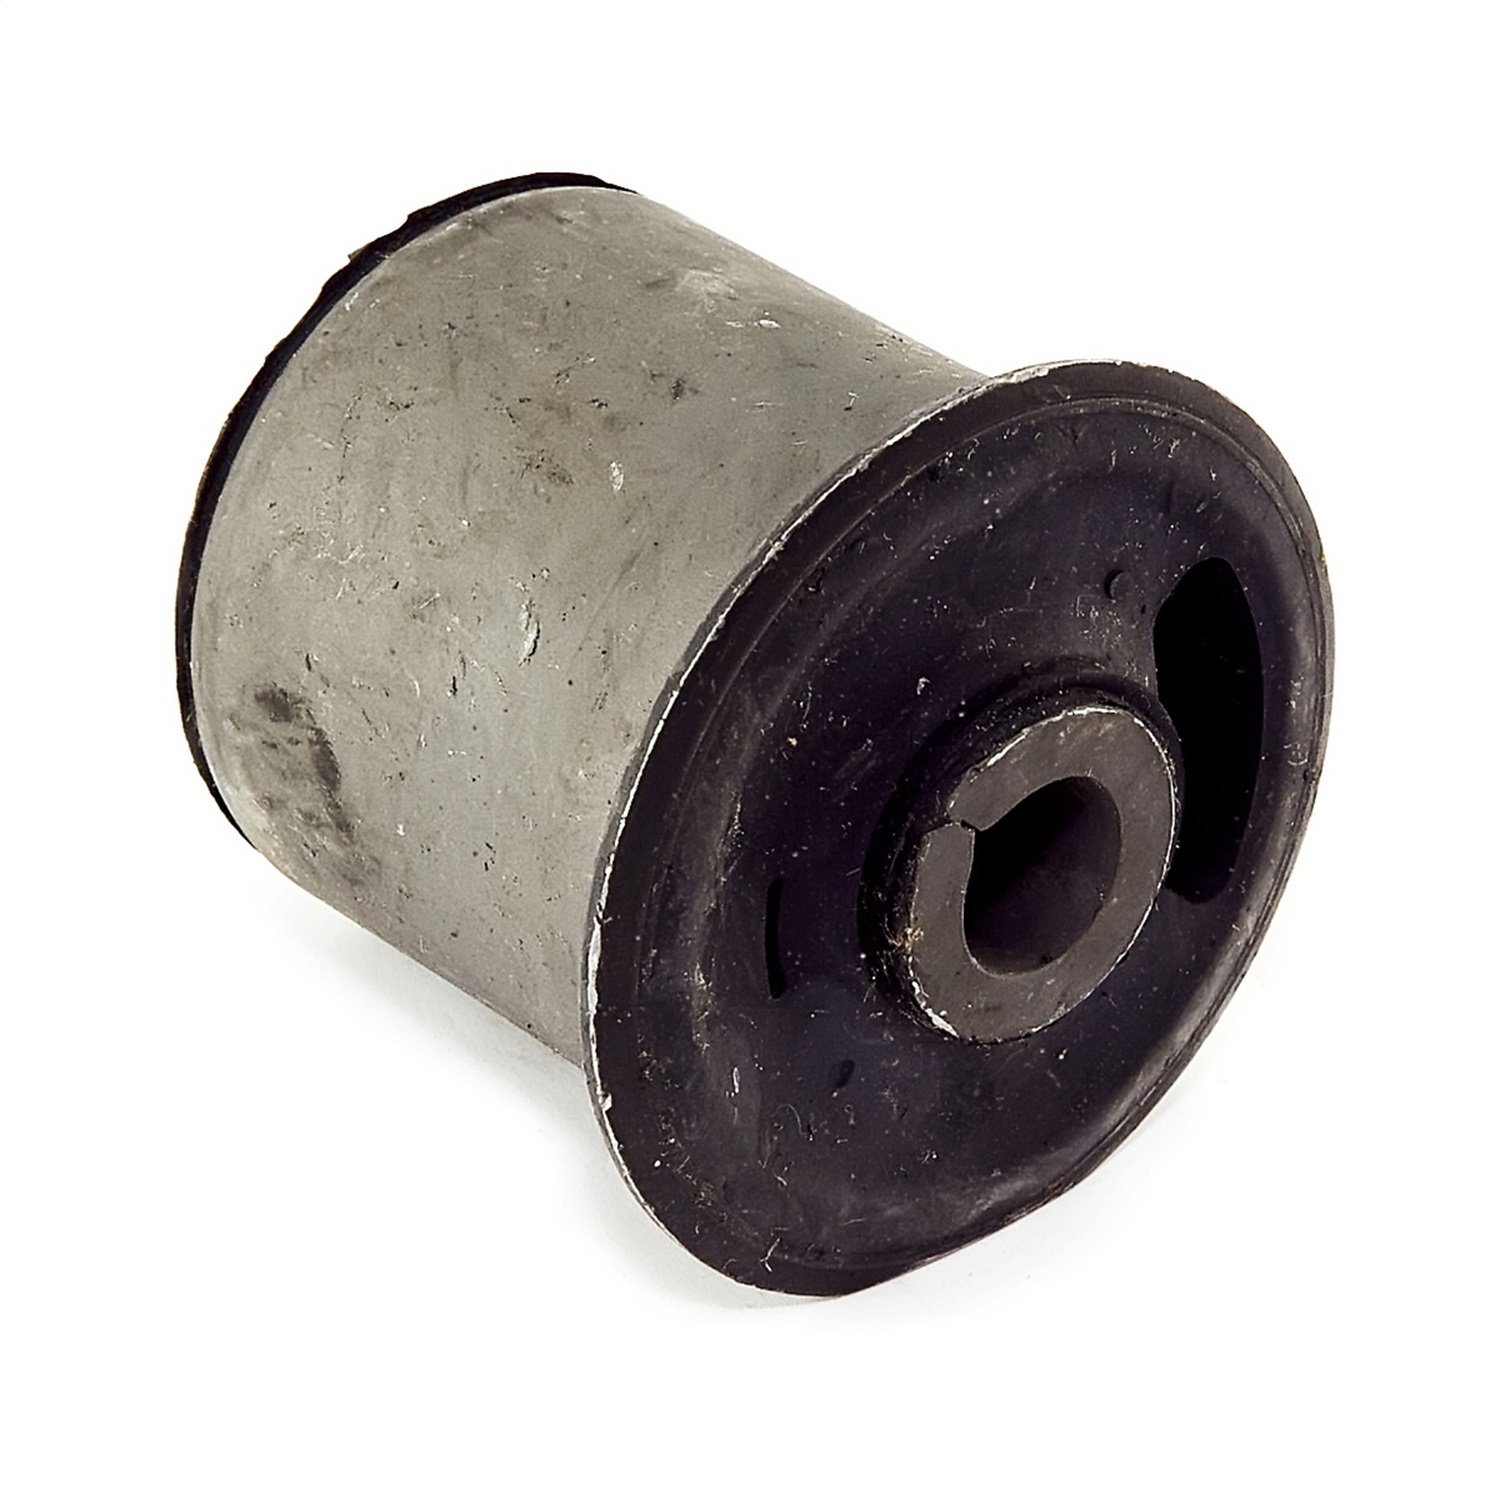 Replacement lower control arm bushing from Omix-ADA, Fits rear position of front lower c